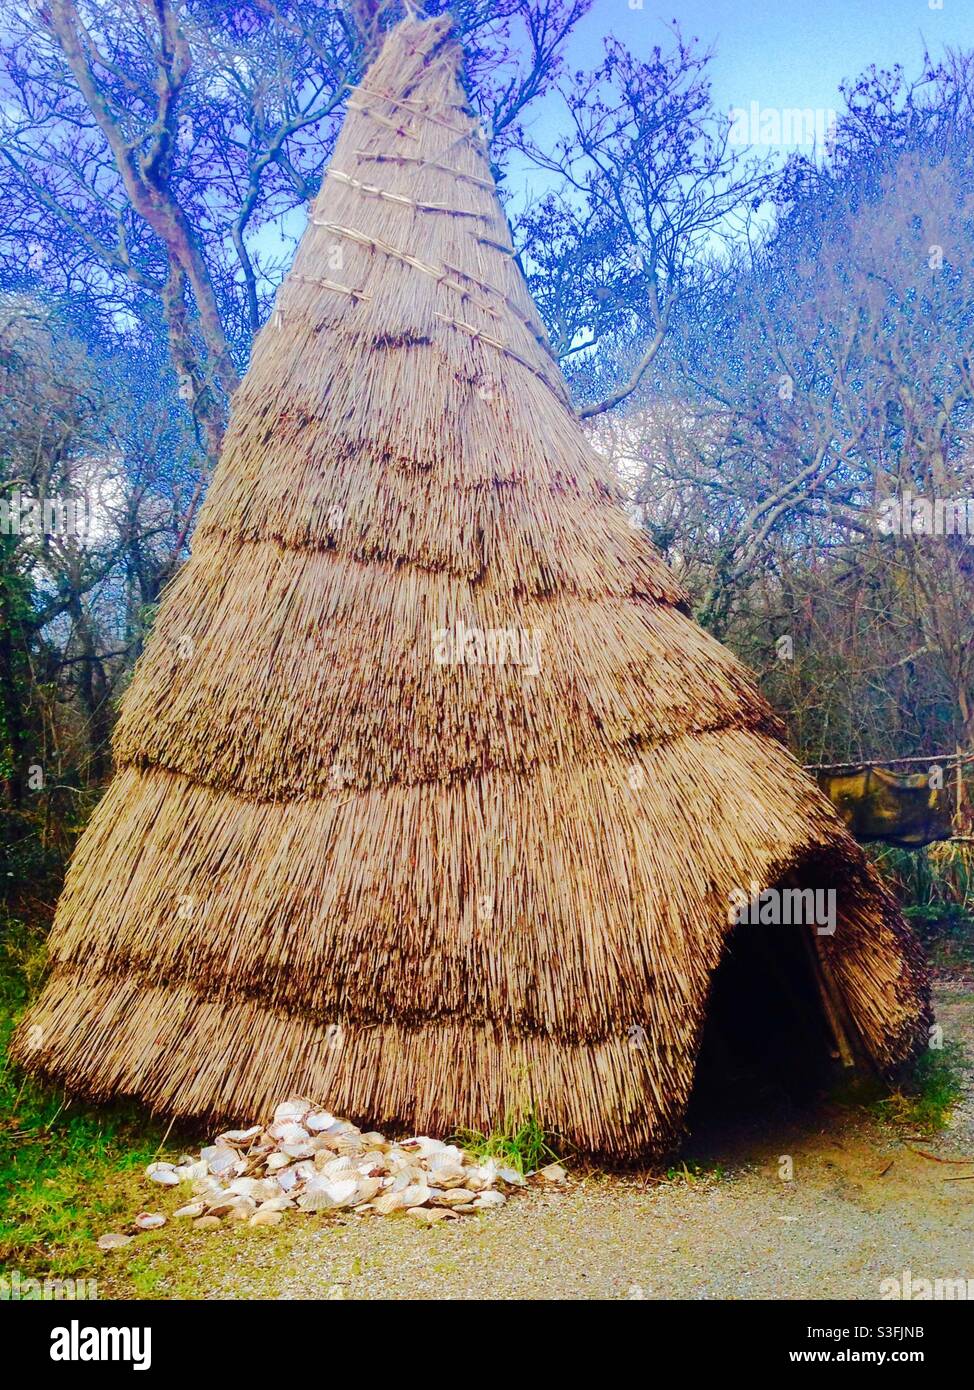 Irish National Heritage Park -recreation of ancient campsite.  Thatched huts inspired by archaeological digs on Mount Sandel, County Derry. Huts  would have been made from tree branches, reeds and mud Stock Photo